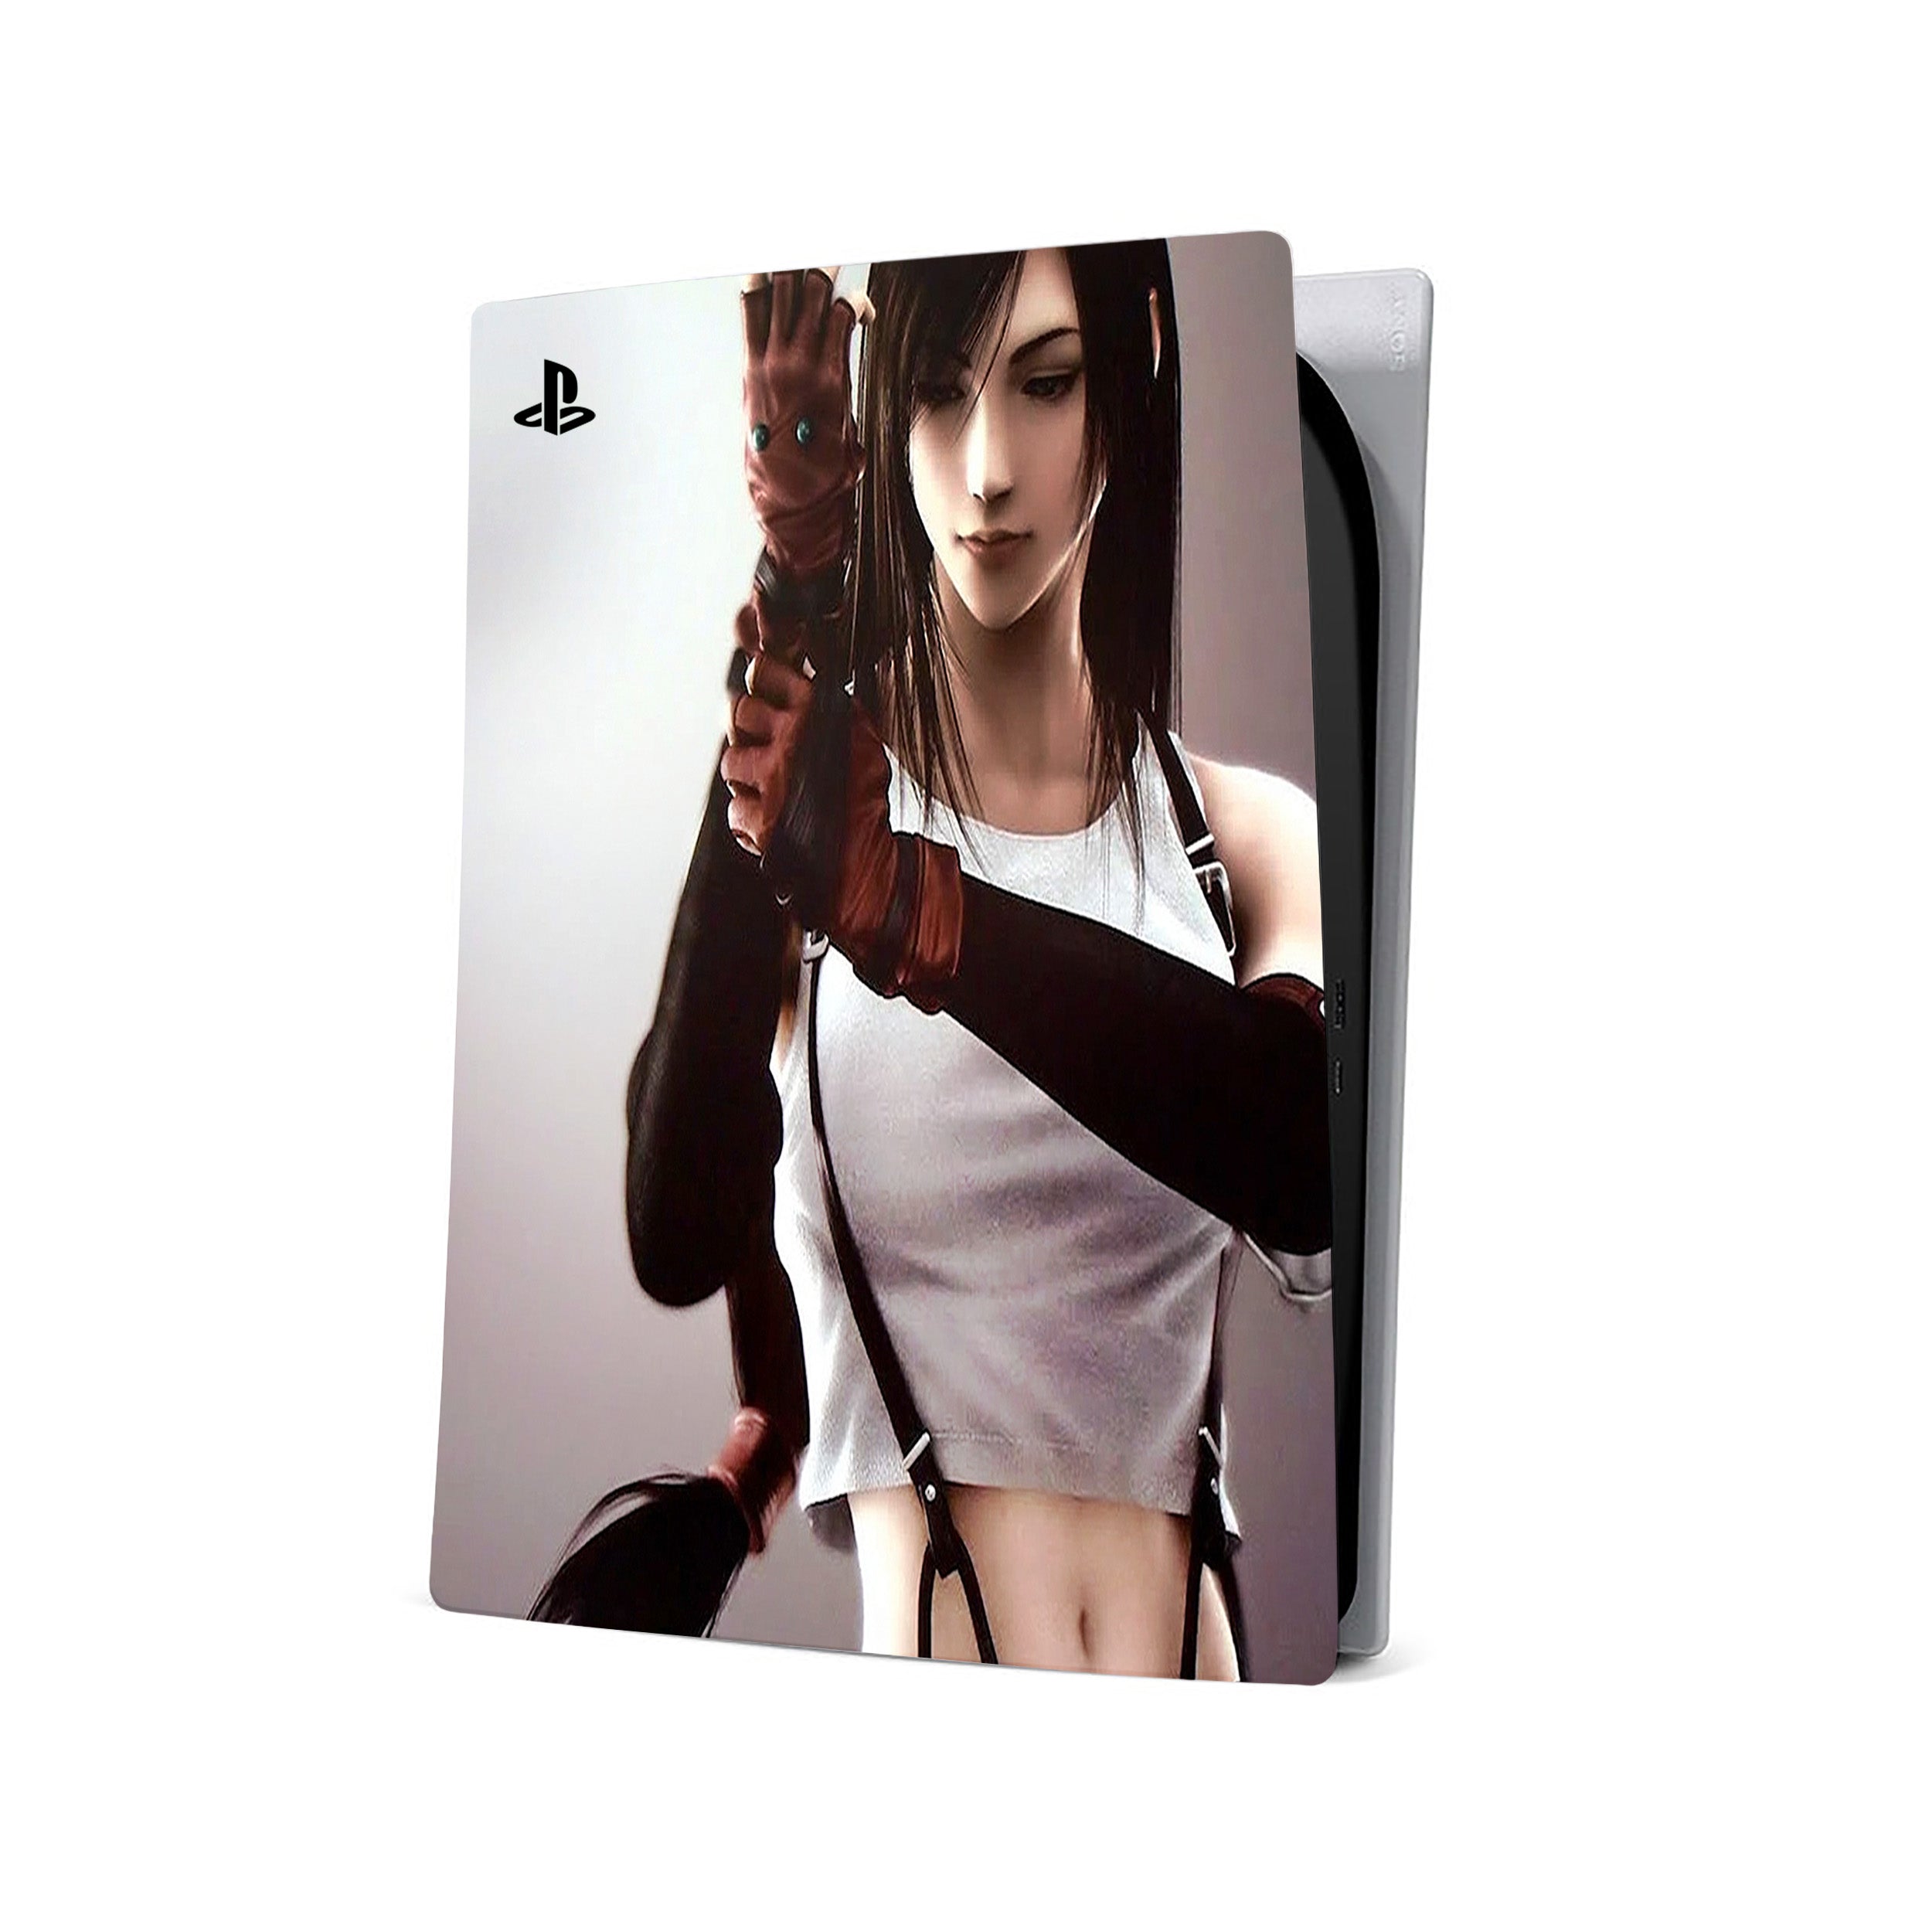 A video game skin featuring a Final Fantasy 7 Tifa design for the PS5.